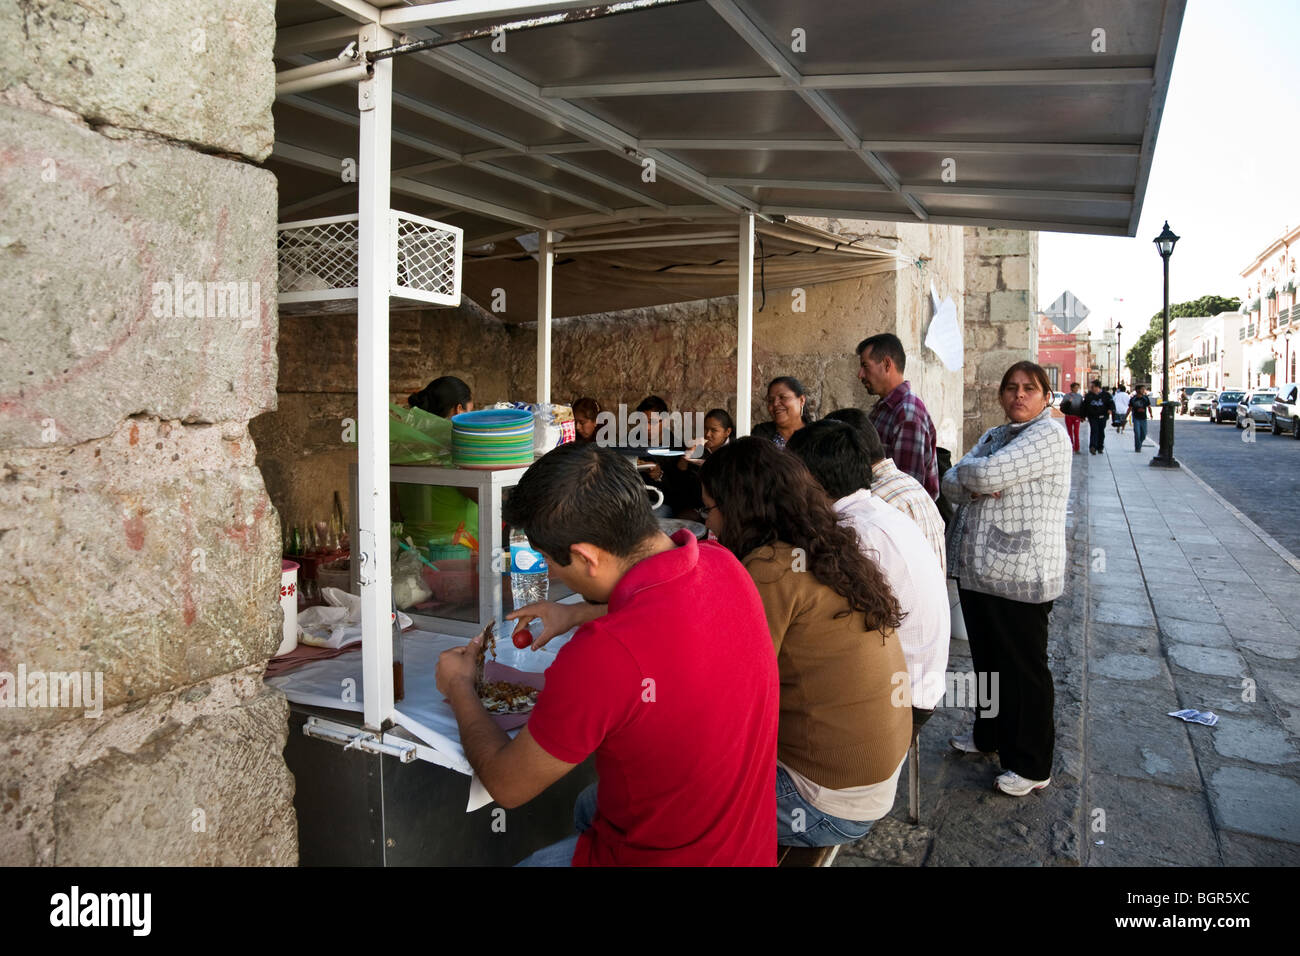 seated customers enjoy their food while those in line wait for their cooking tacos at a street stall booth Oaxaca City Mexico Stock Photo